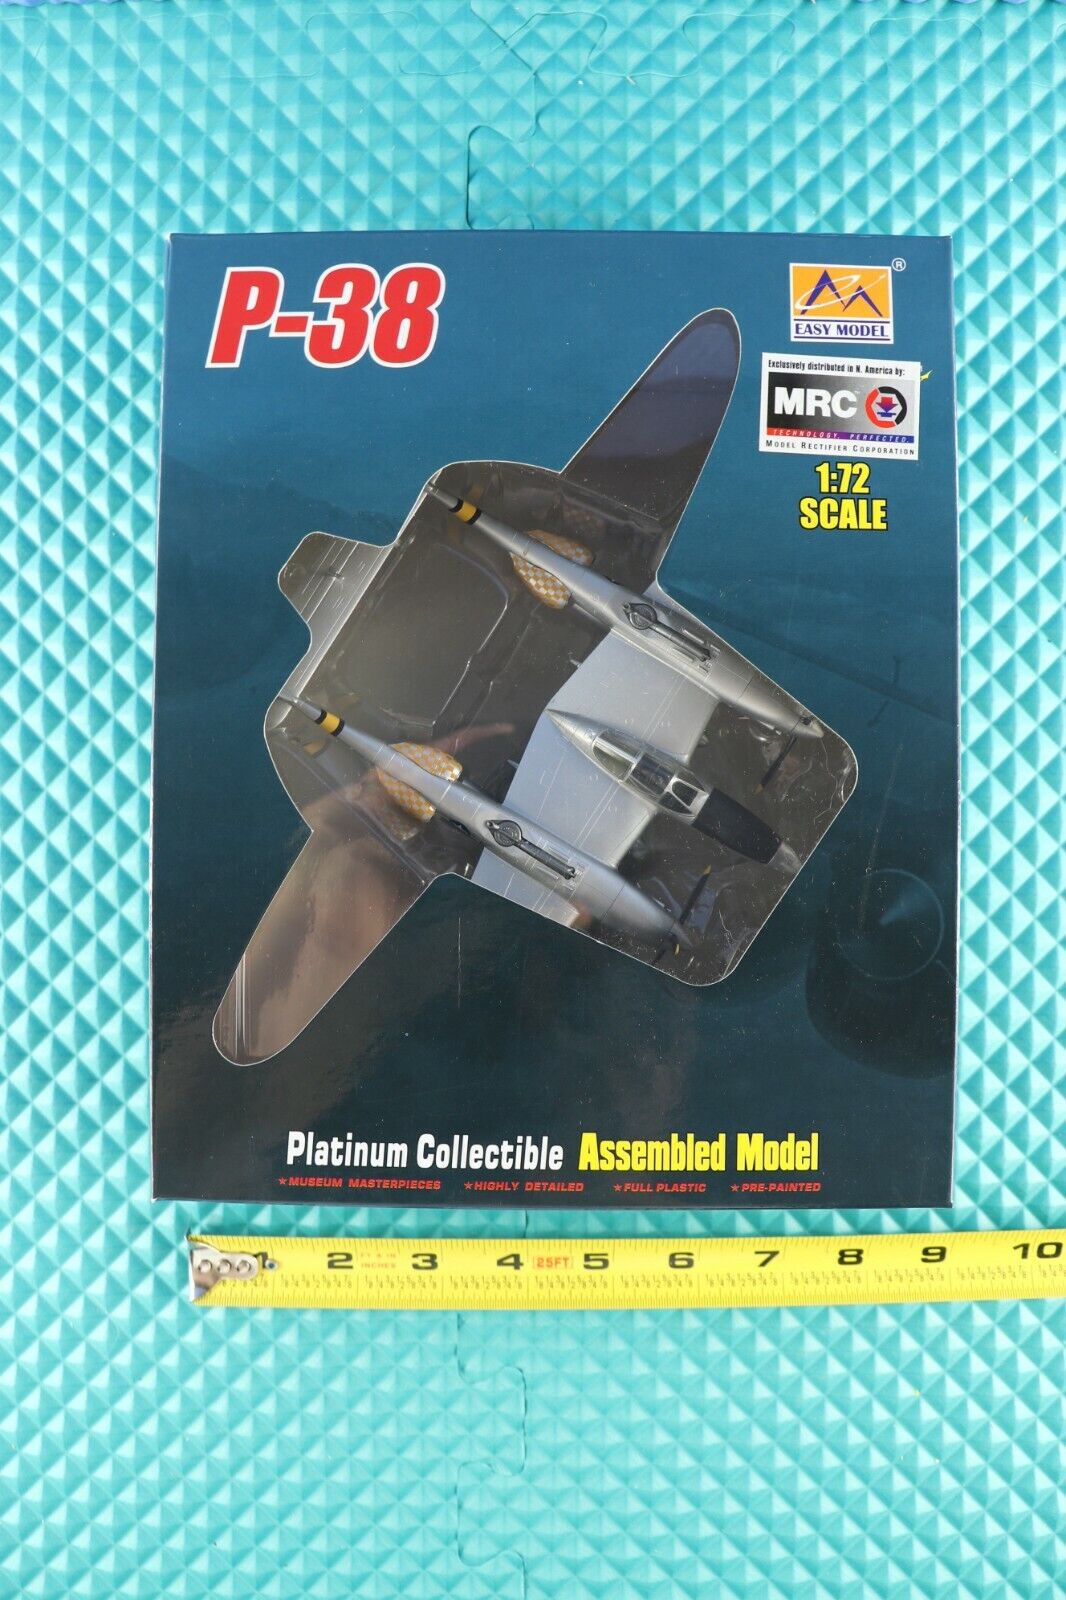 Easy Model 1/72 Scale P-38 Platinum Collectible Assembled Aircraft Model 36433